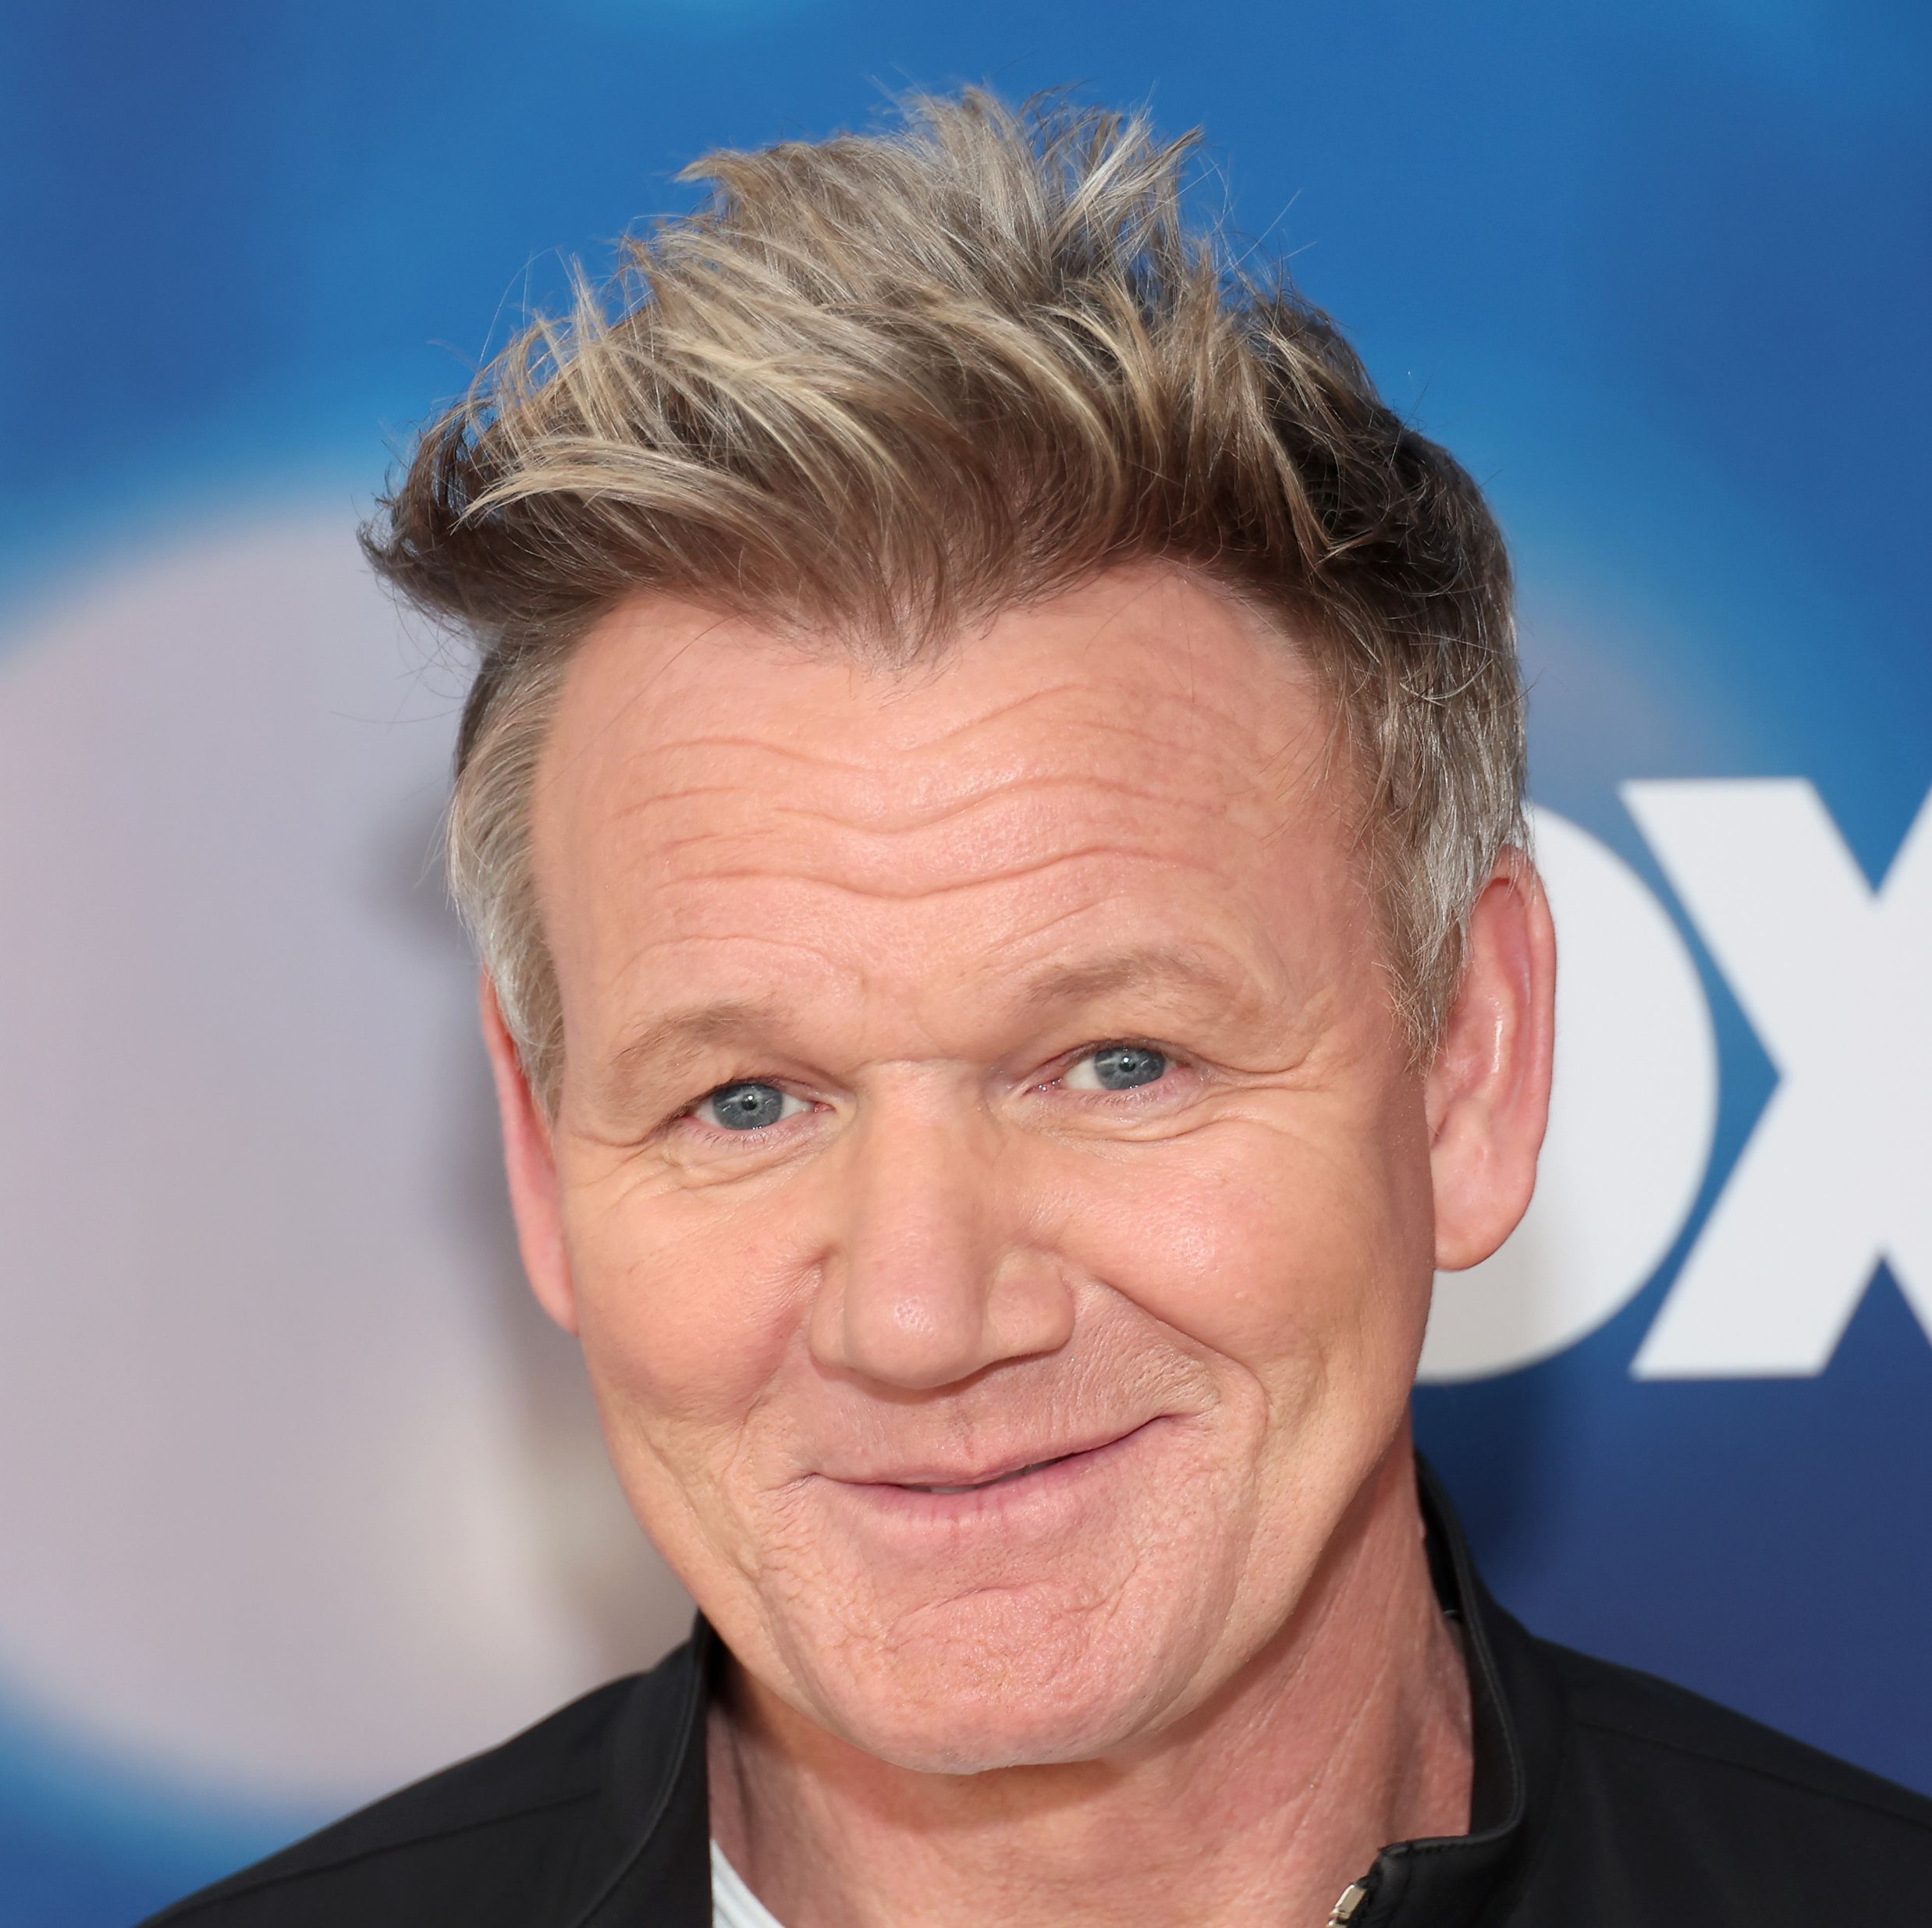 Gordon Ramsay Posted A Picture Of His Lookalike Newborn Son & Fans Can't Stop Making Comparisons